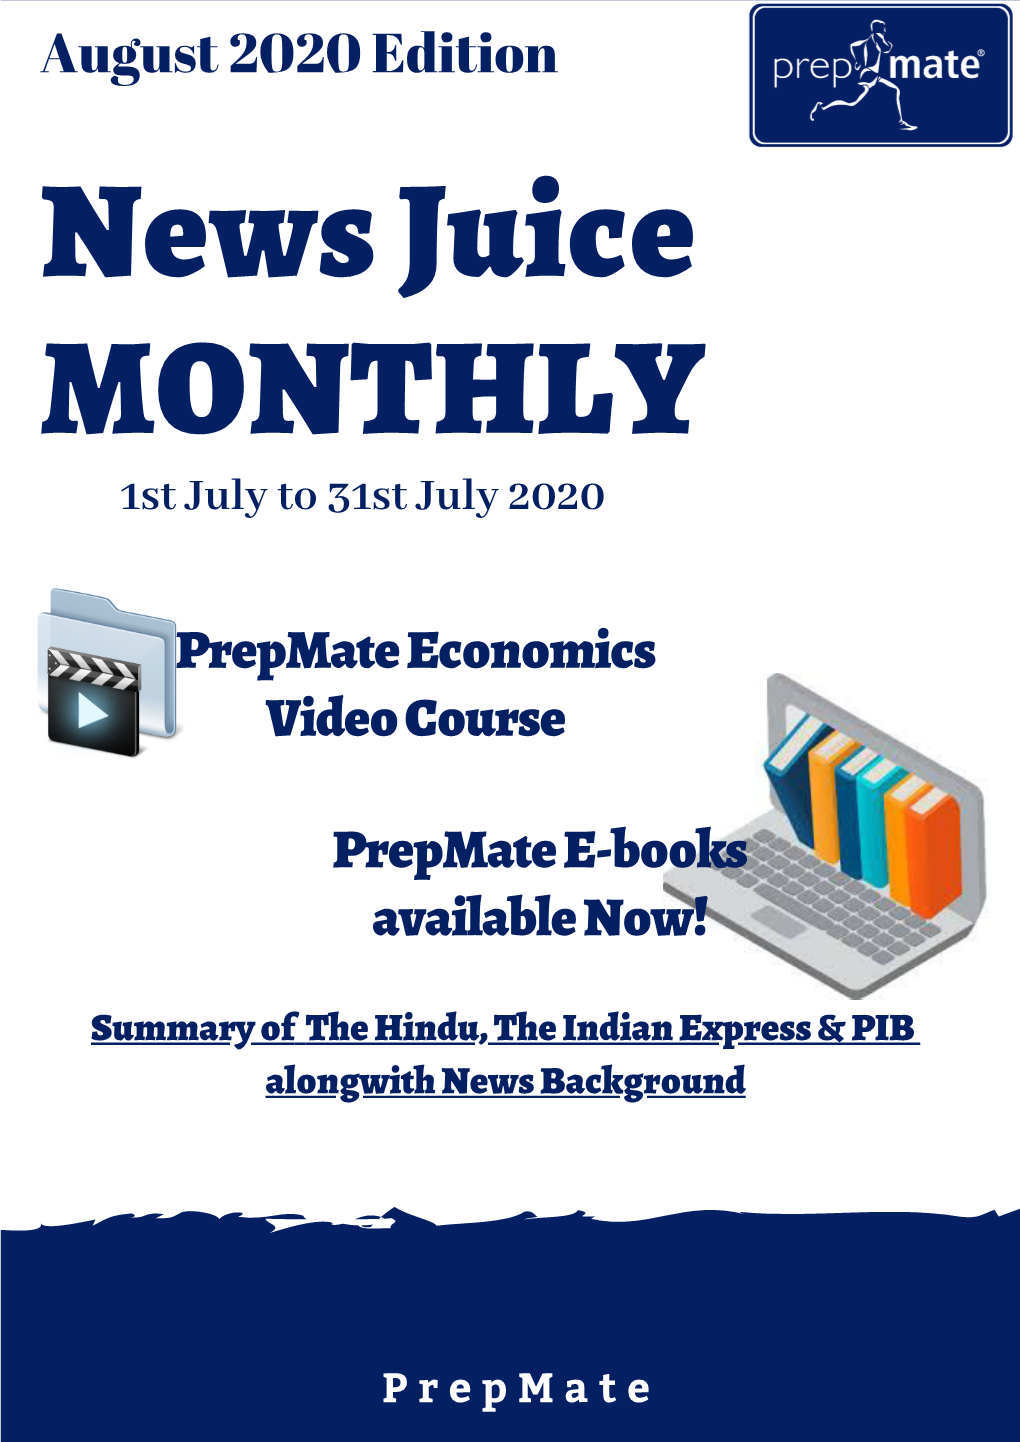 August 2020 Edition News Juice MONTHLY 1St July to 31St July 2020